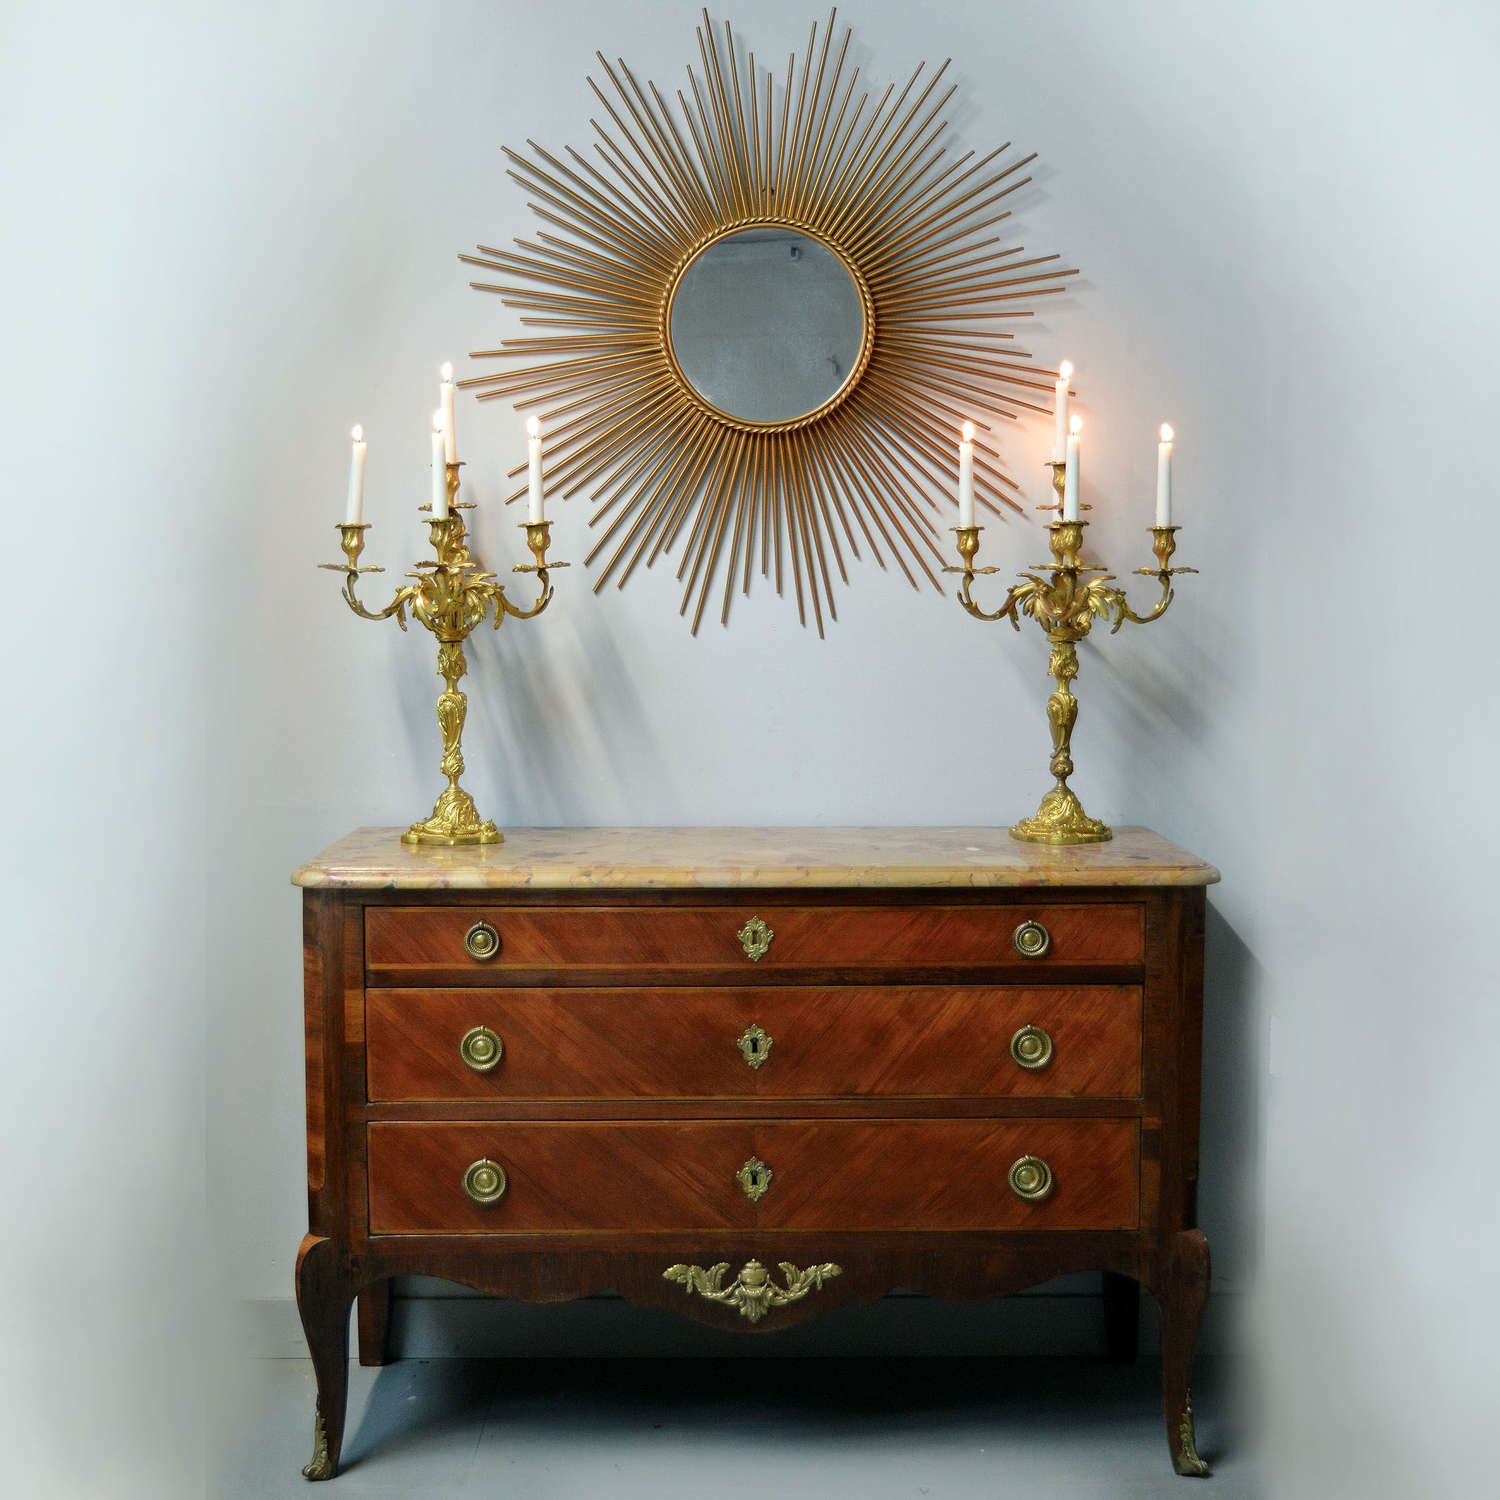 Mid 19th Century Transitional style commode